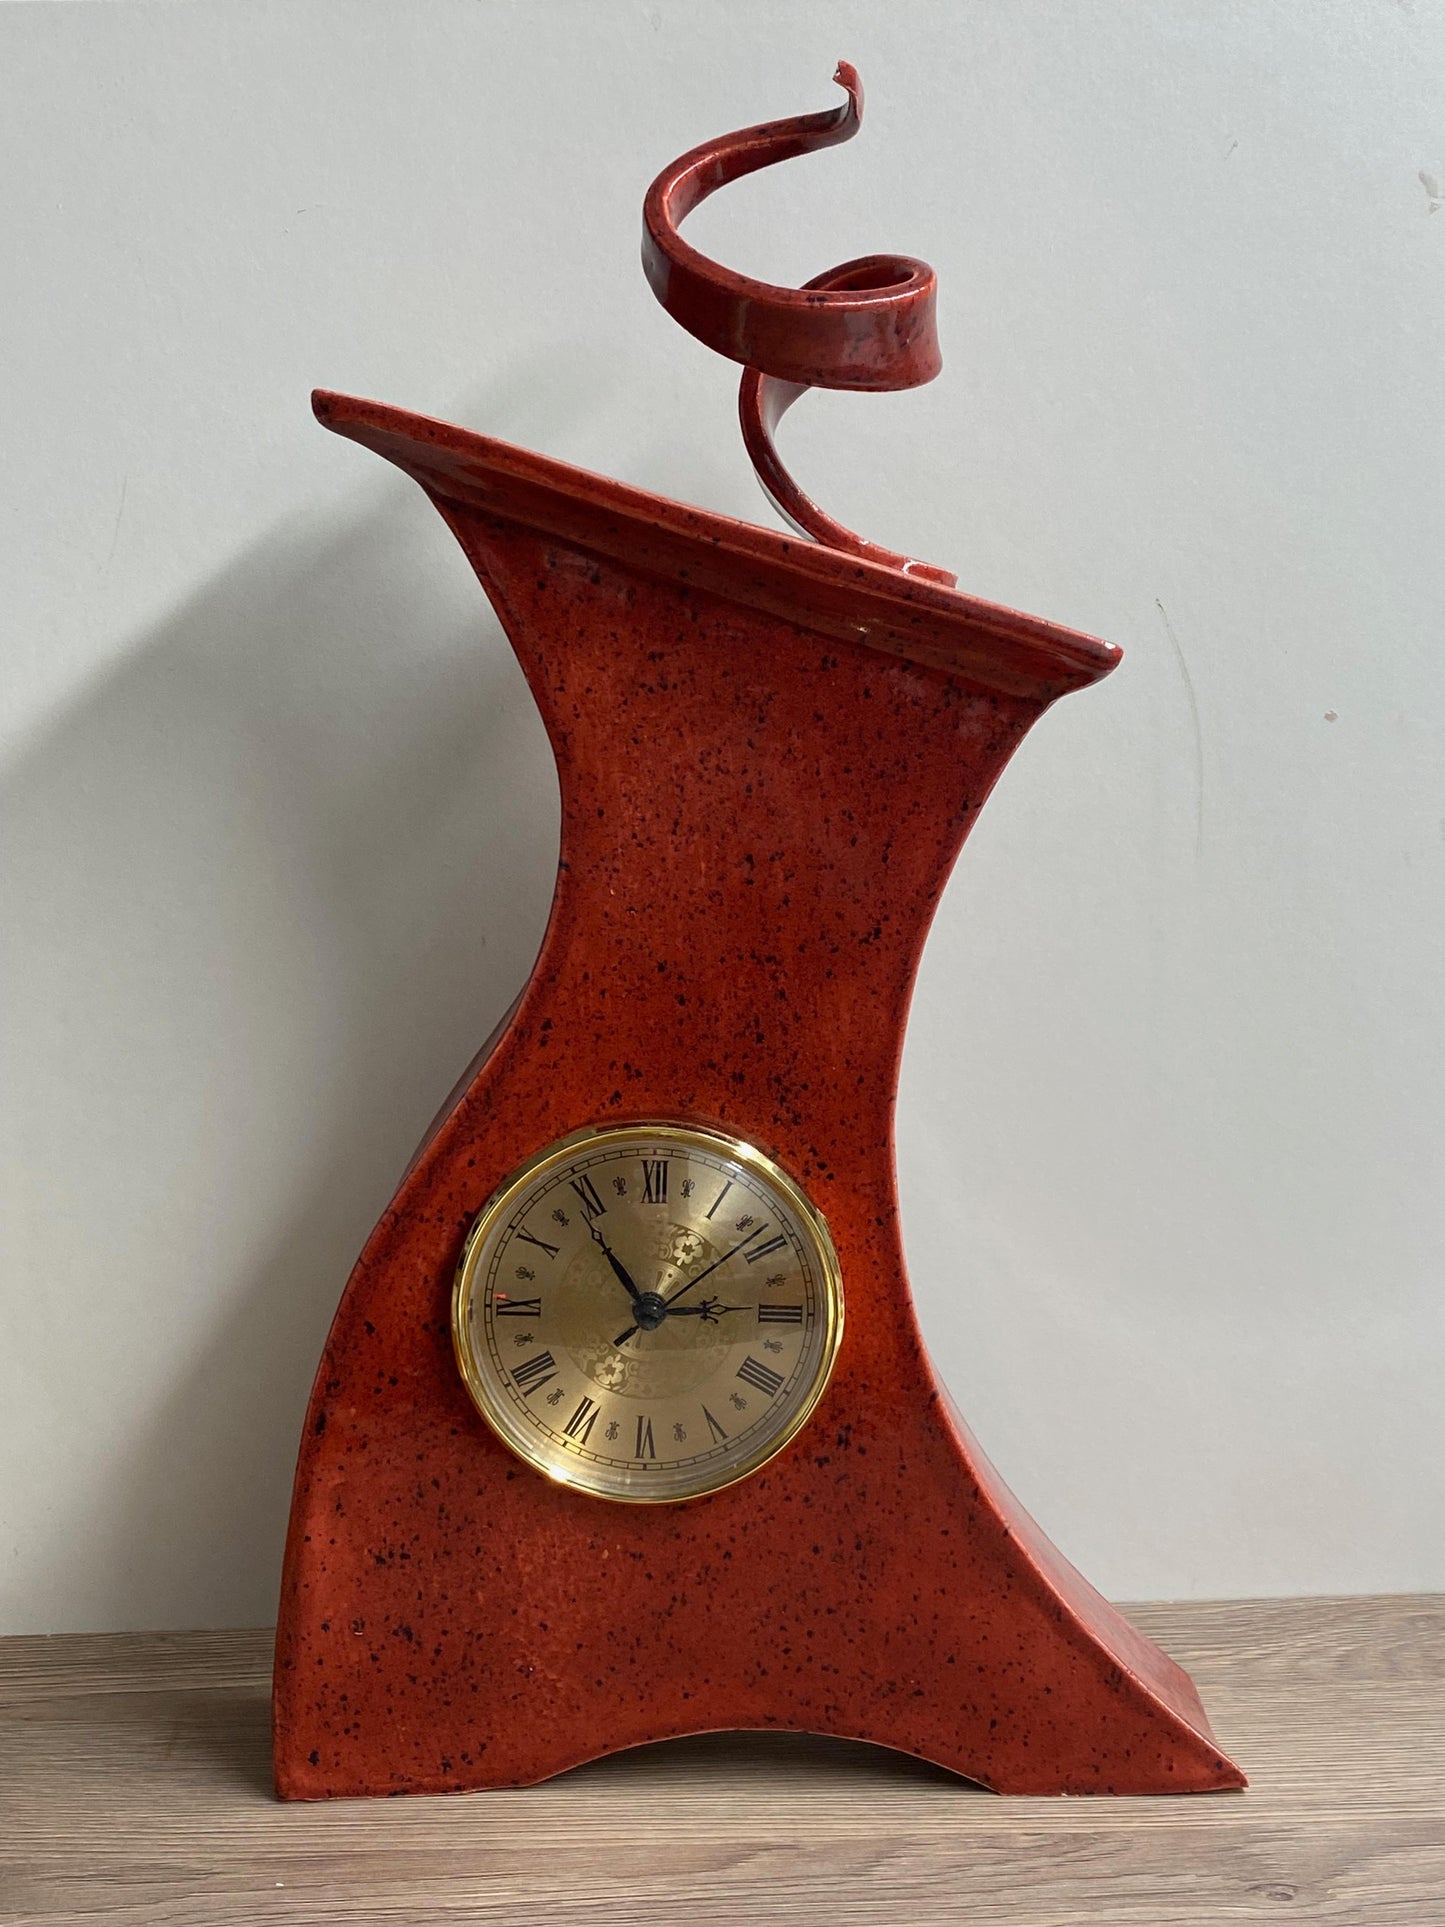 Tall Ceramic Mantel Clock with Enclosed Face - Speckled Red